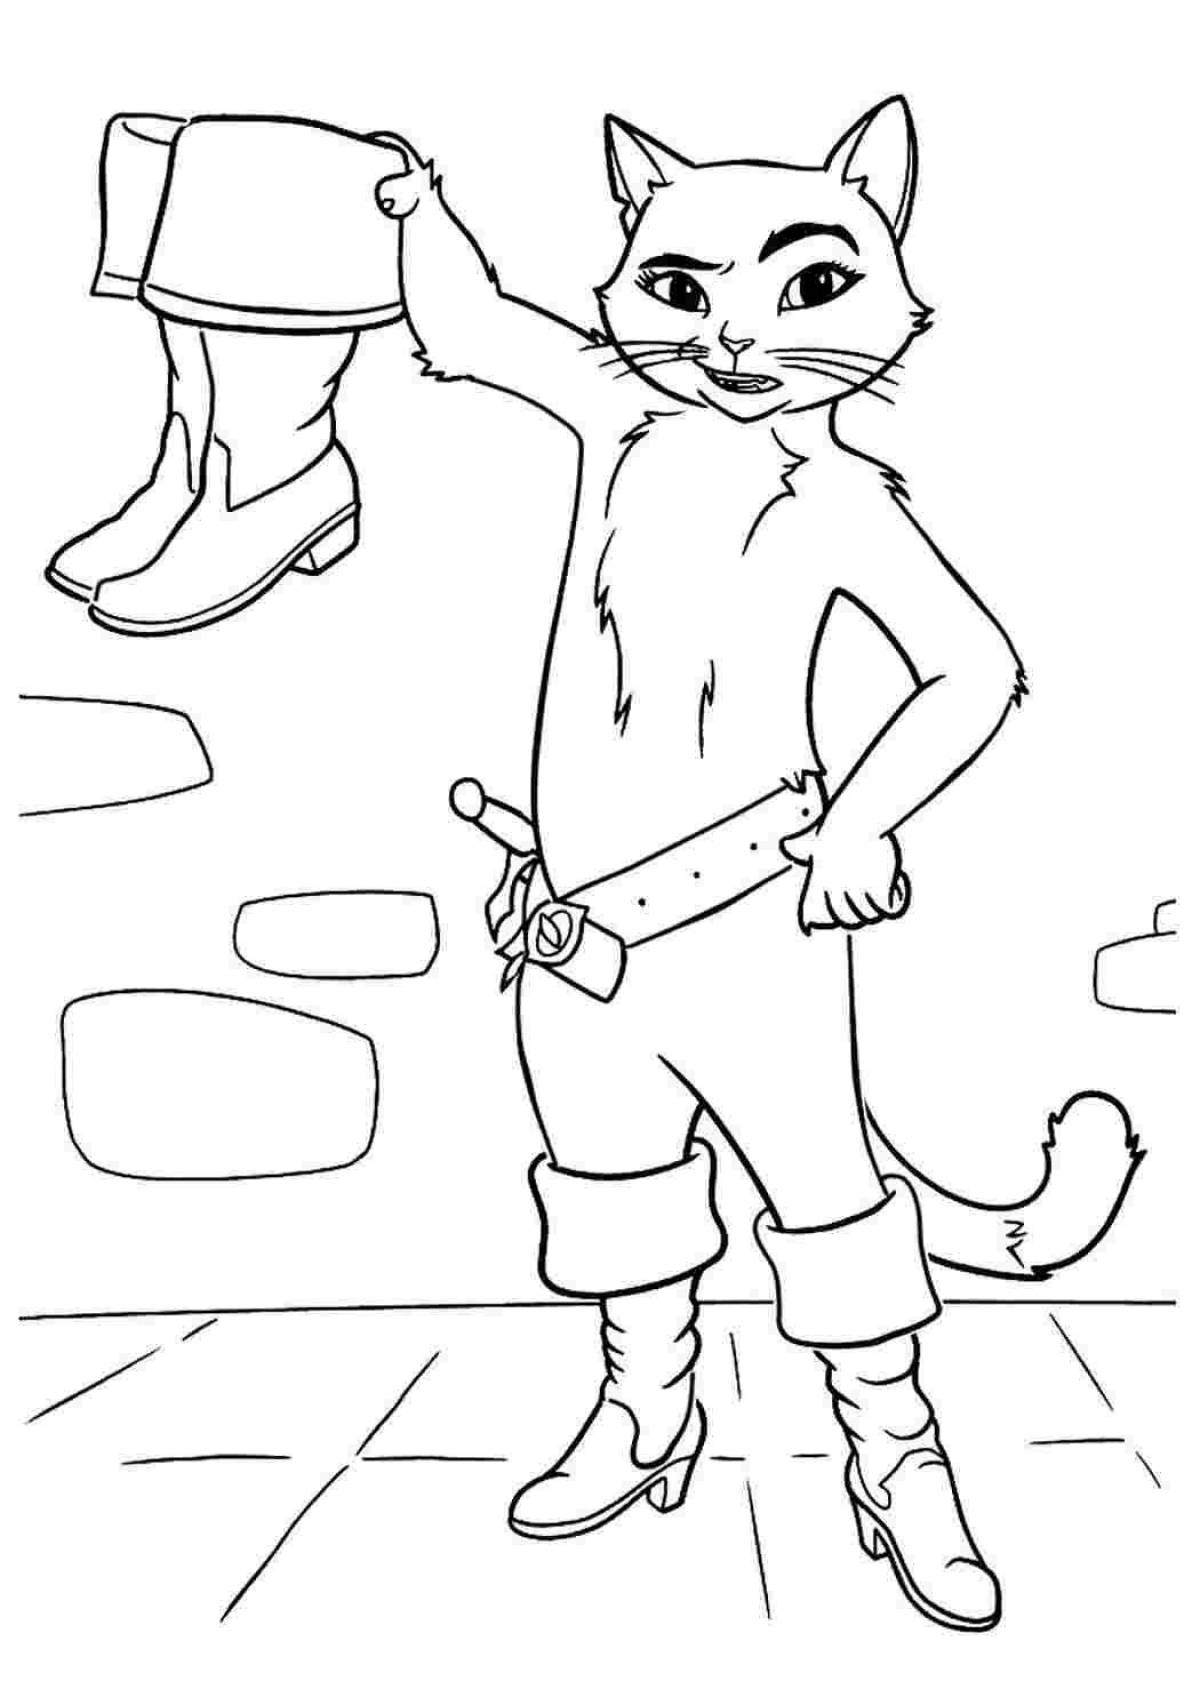 Colorful Puss in Boots coloring book for kids